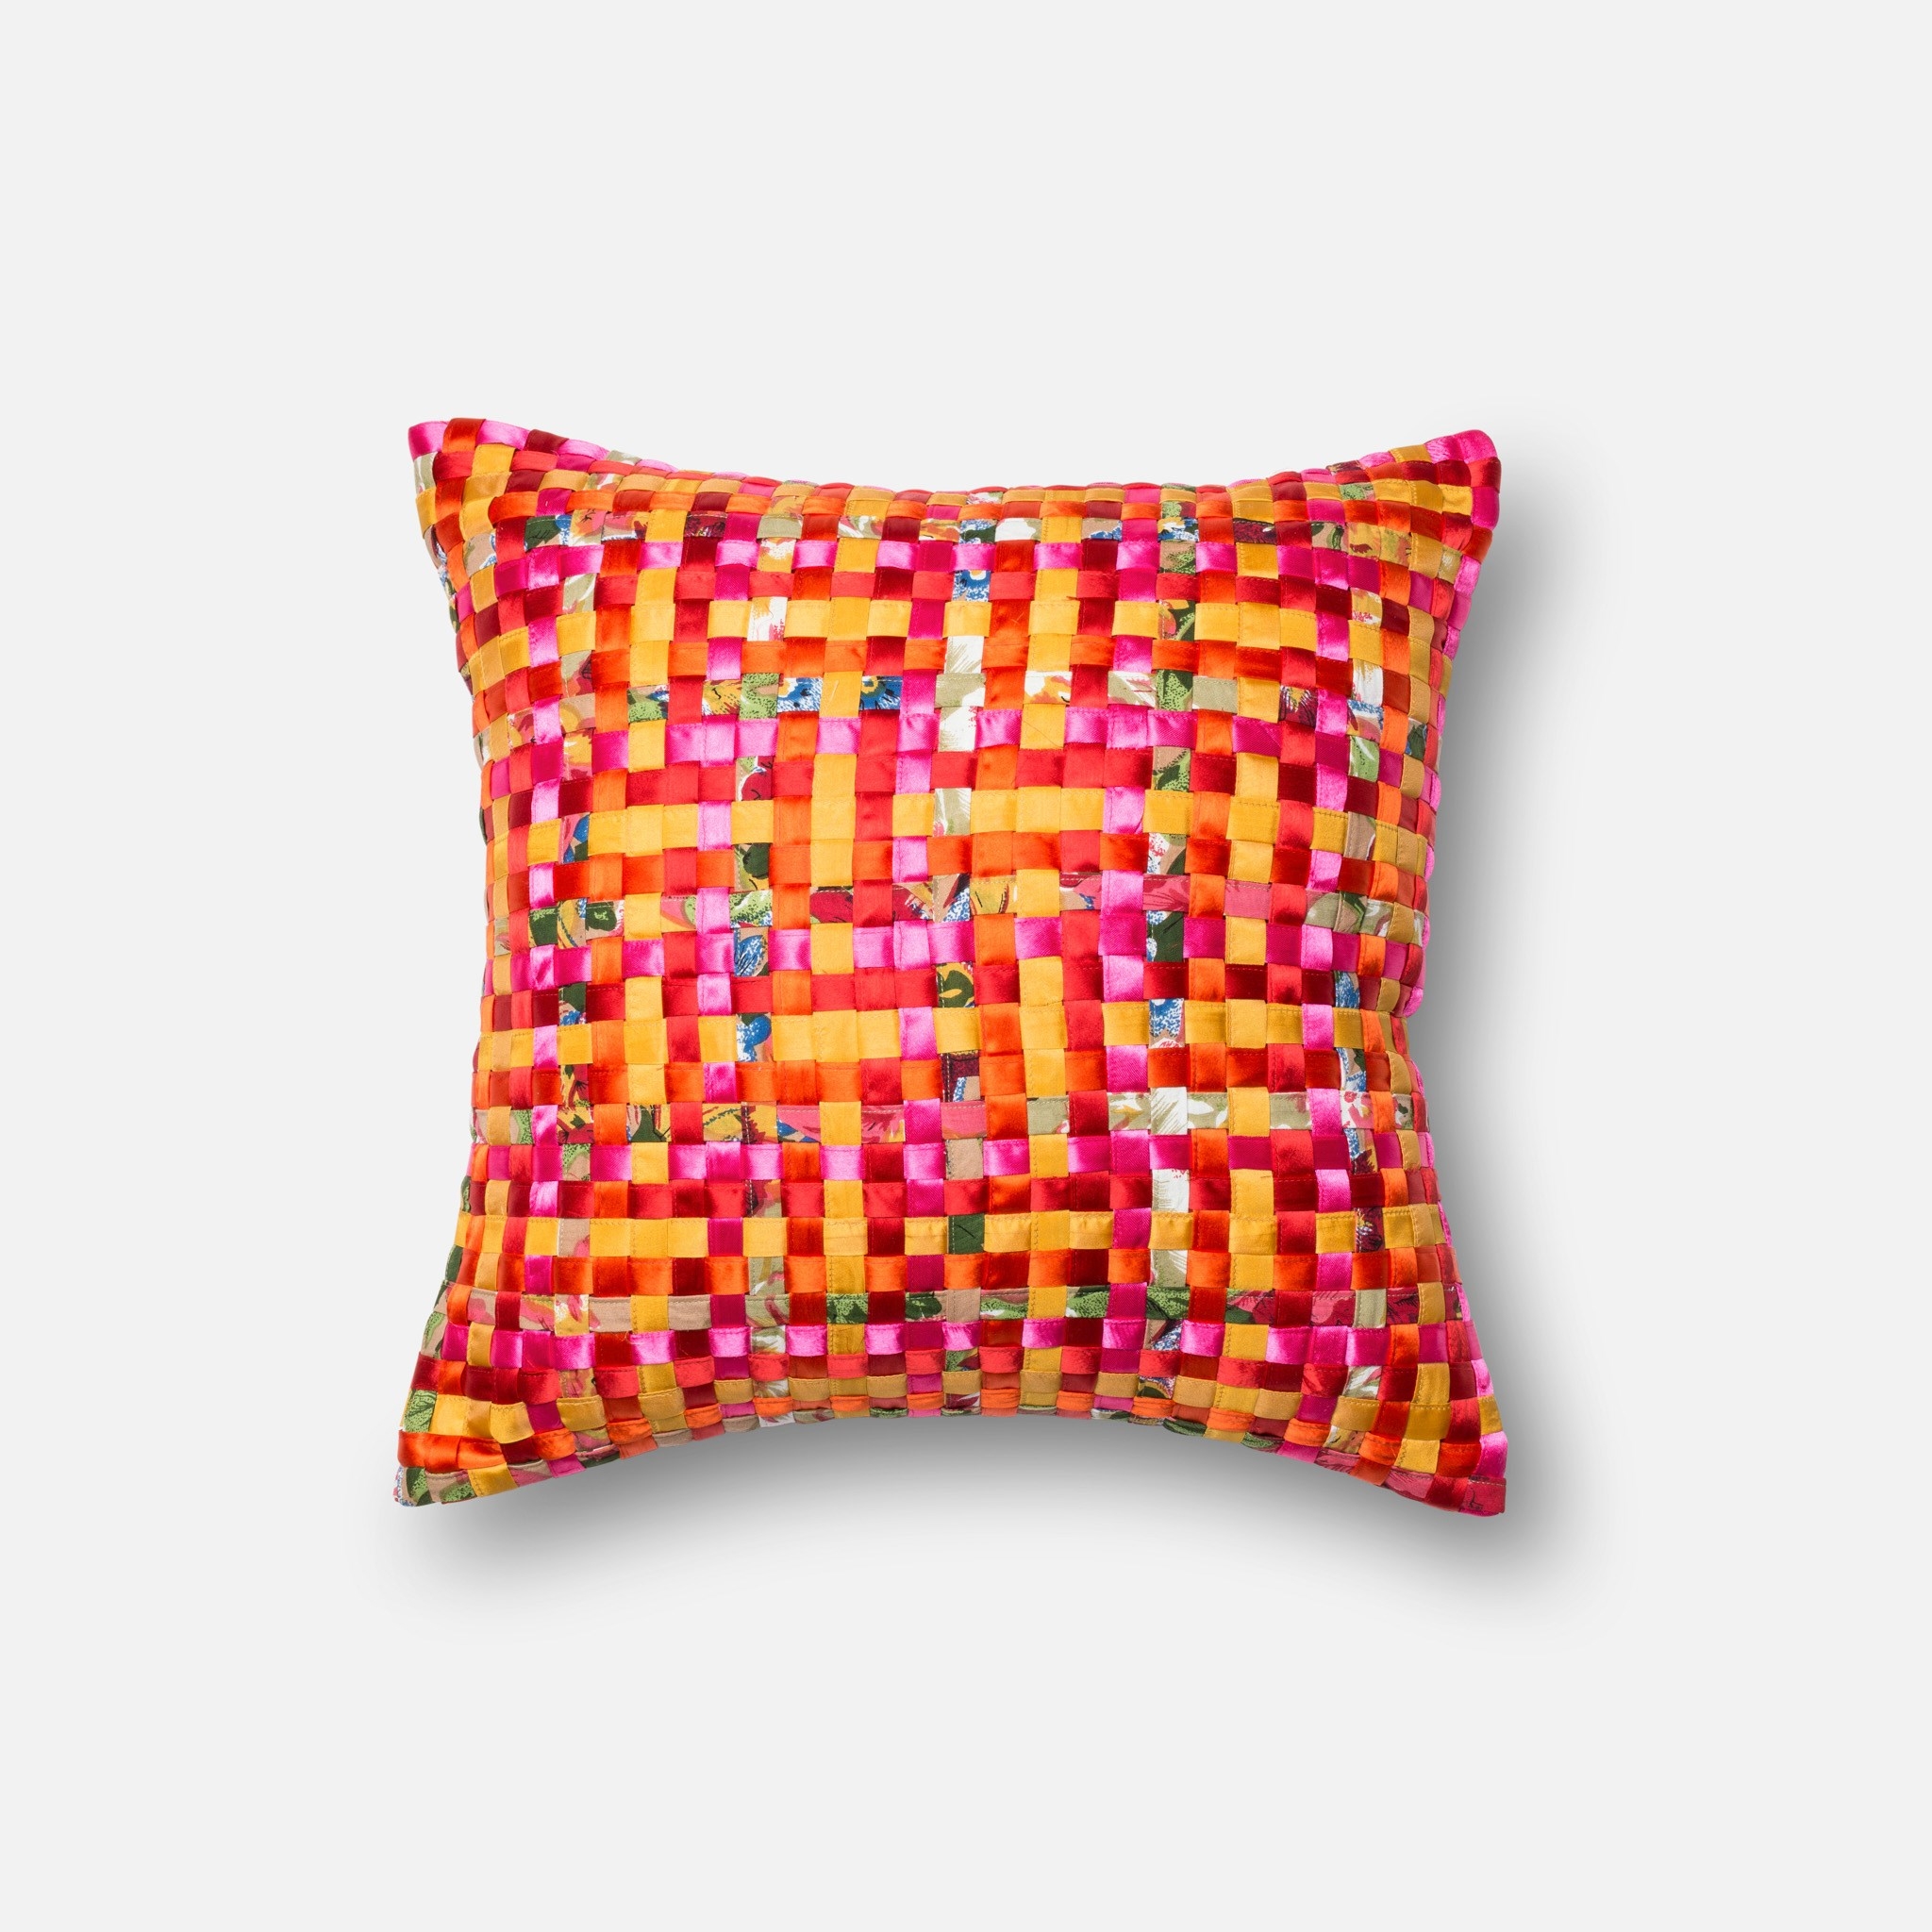 PILLOWS - PINK / ORANGE - 18" X 18" Cover Only - Image 0